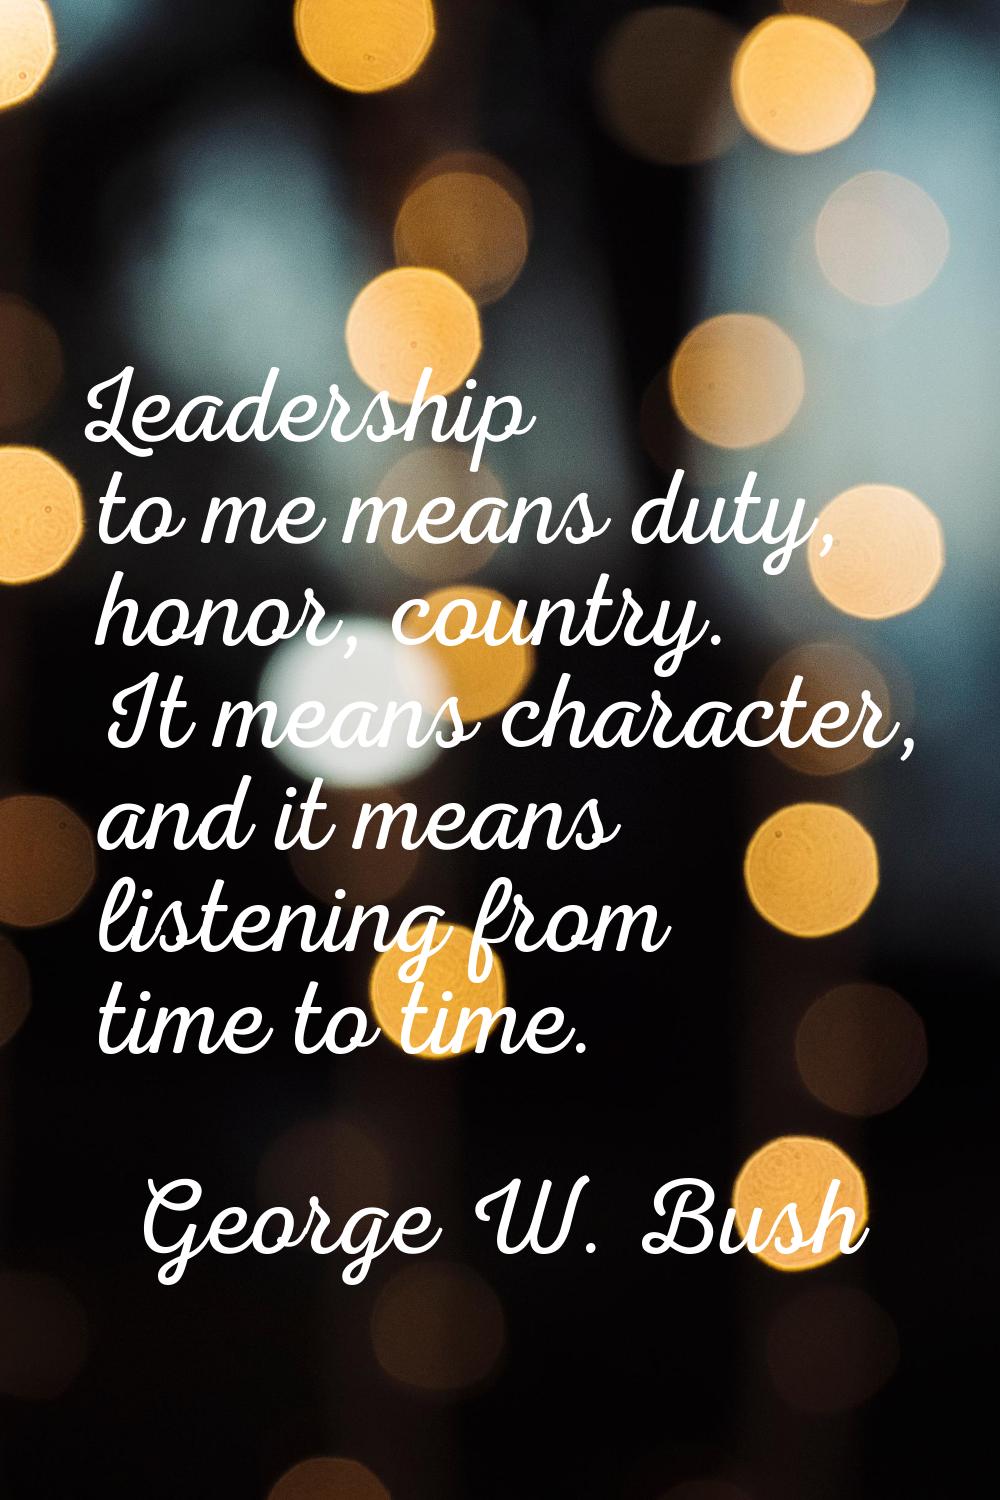 Leadership to me means duty, honor, country. It means character, and it means listening from time t